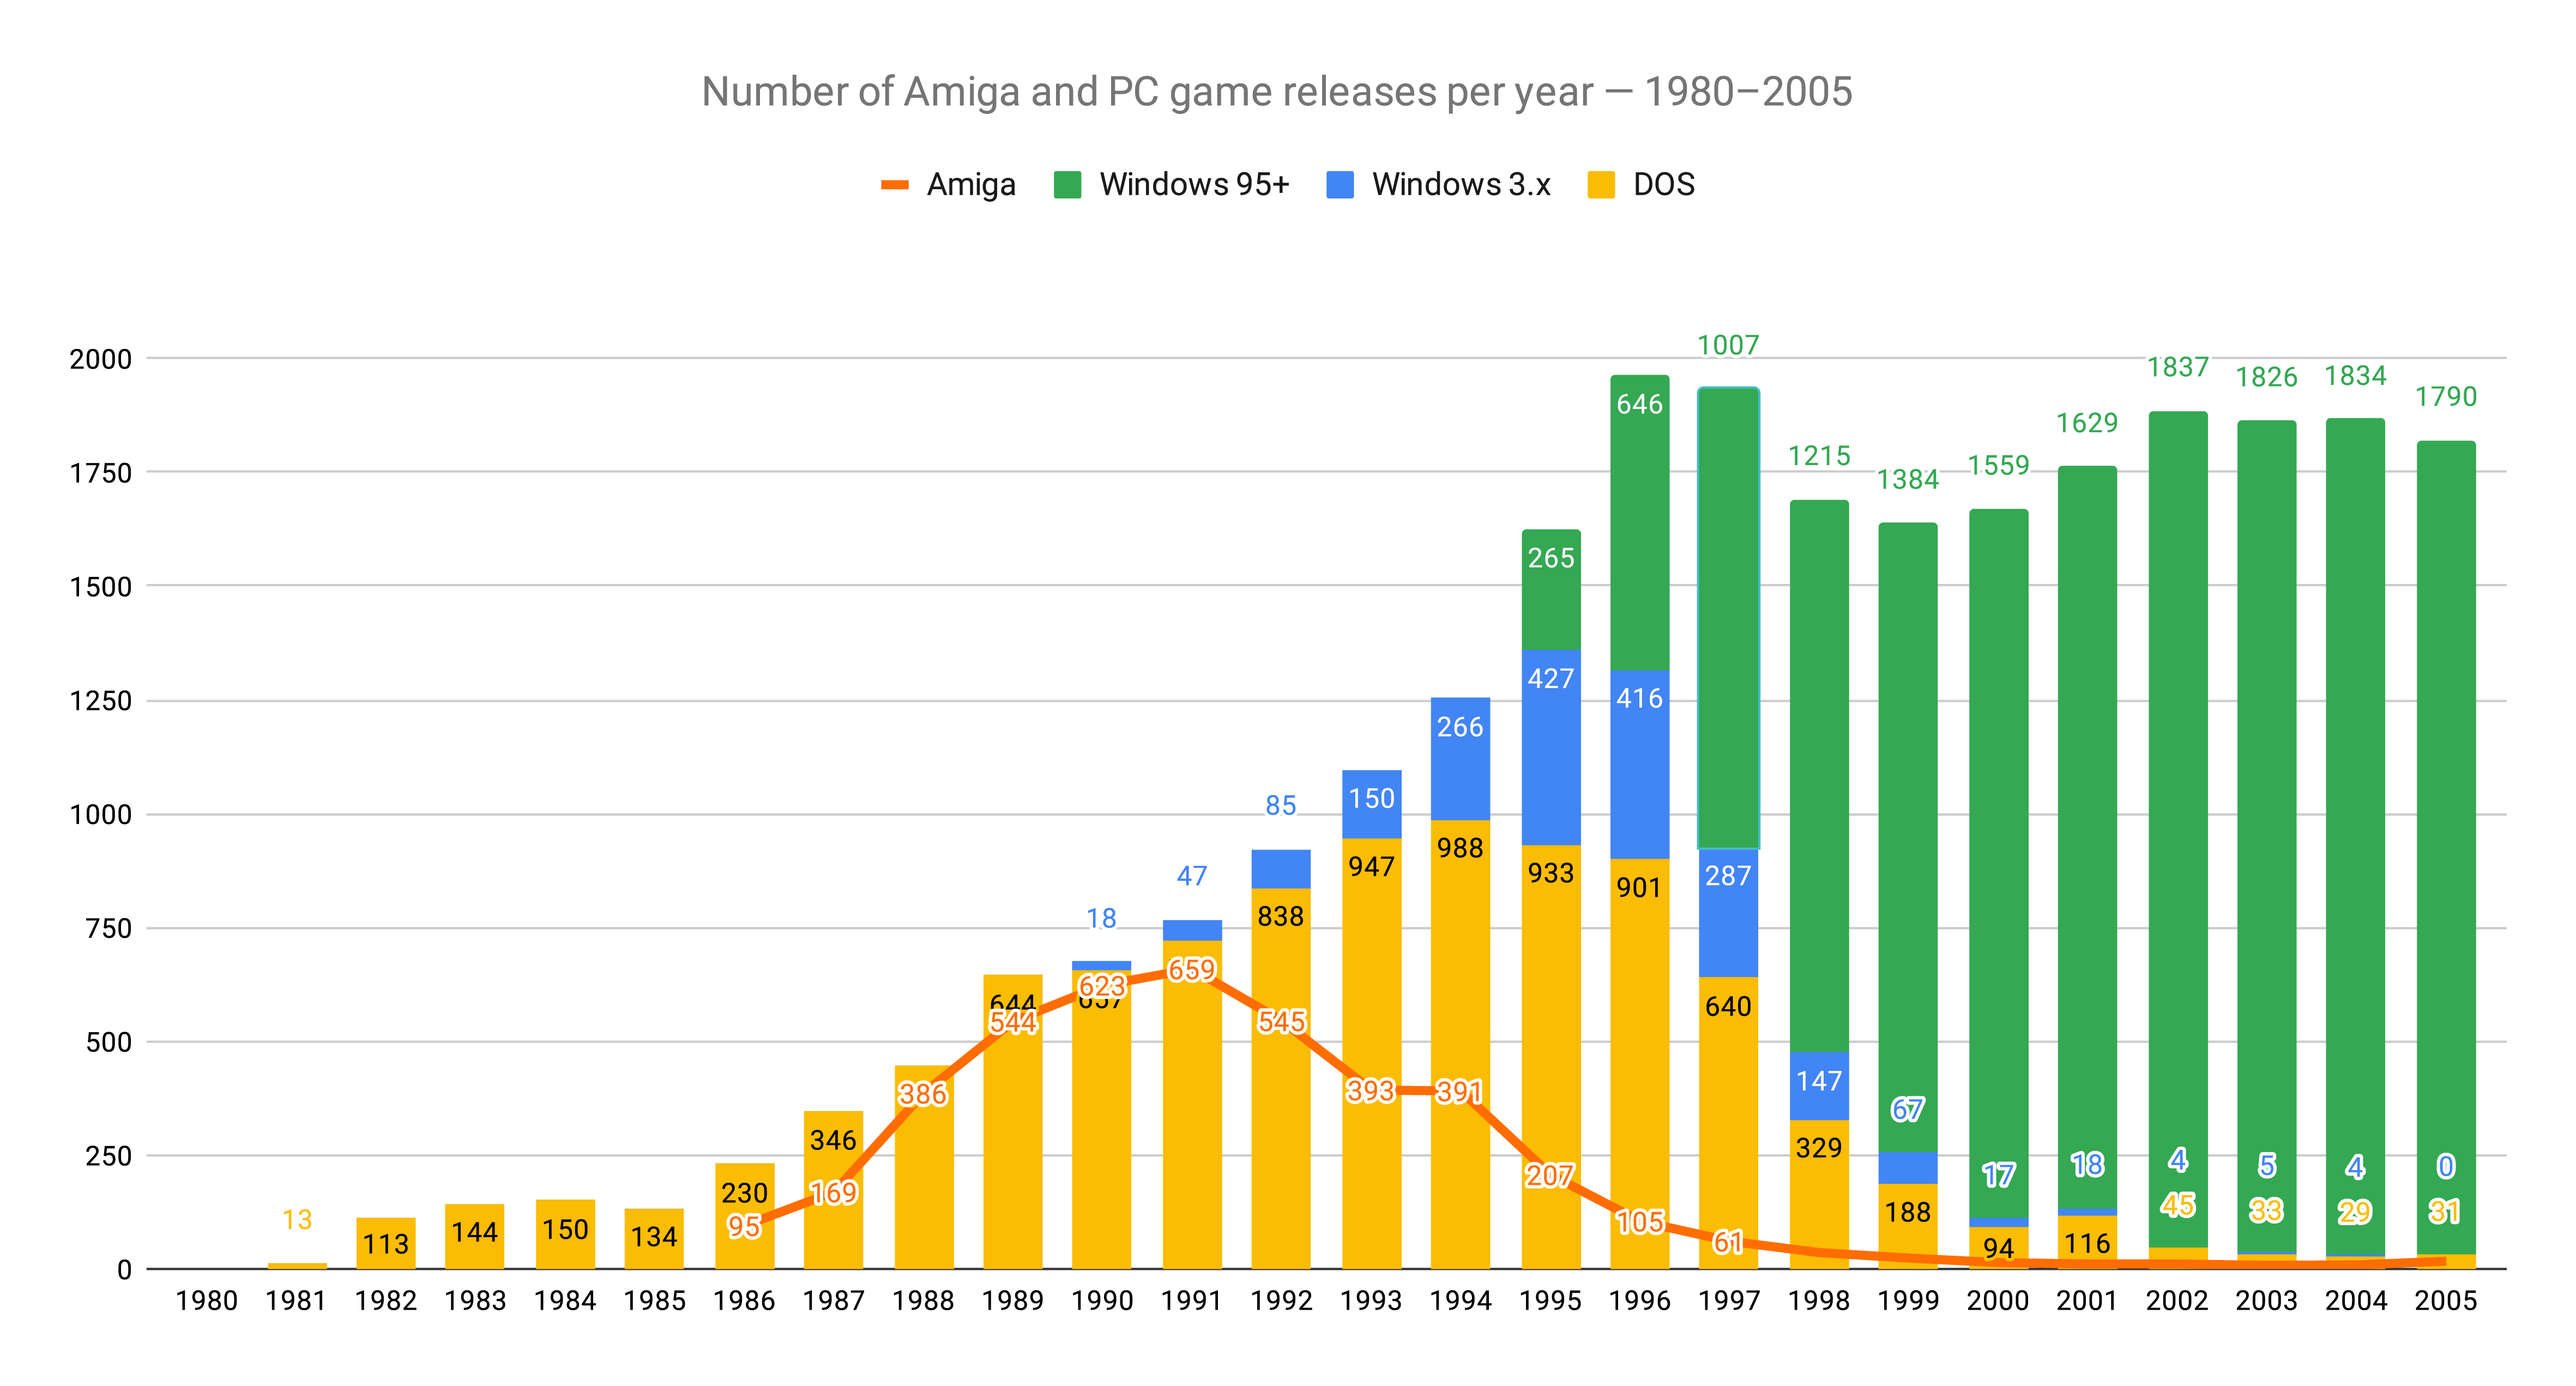 Number of Amiga and PC game releases per year between 1980-2005